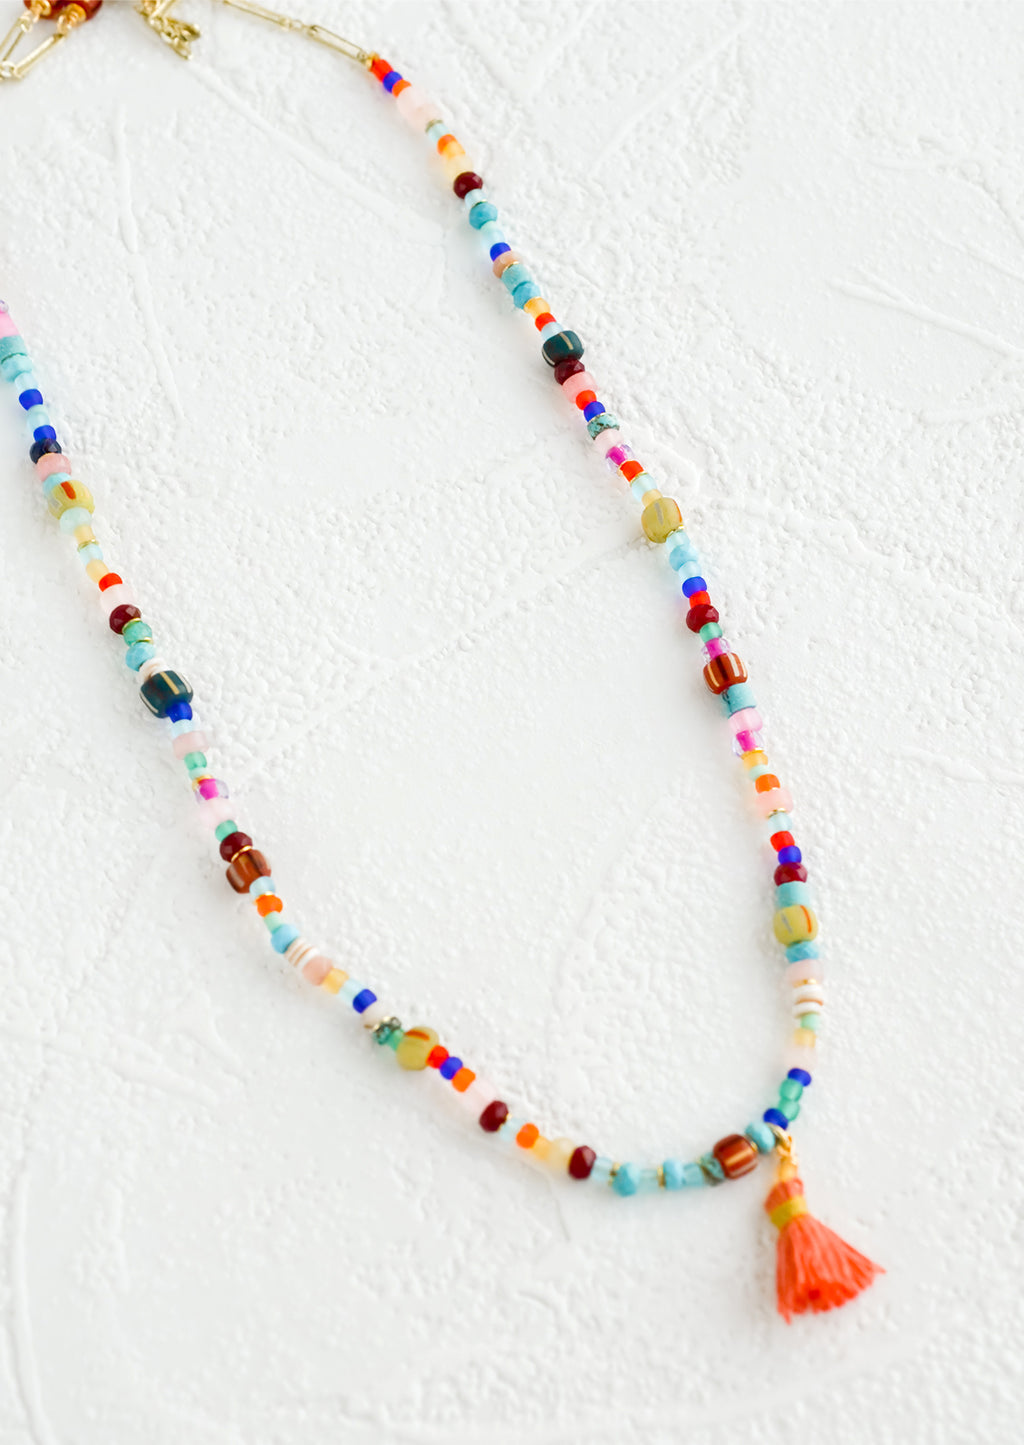 3: Colorful beaded necklace with peach tassel at center.